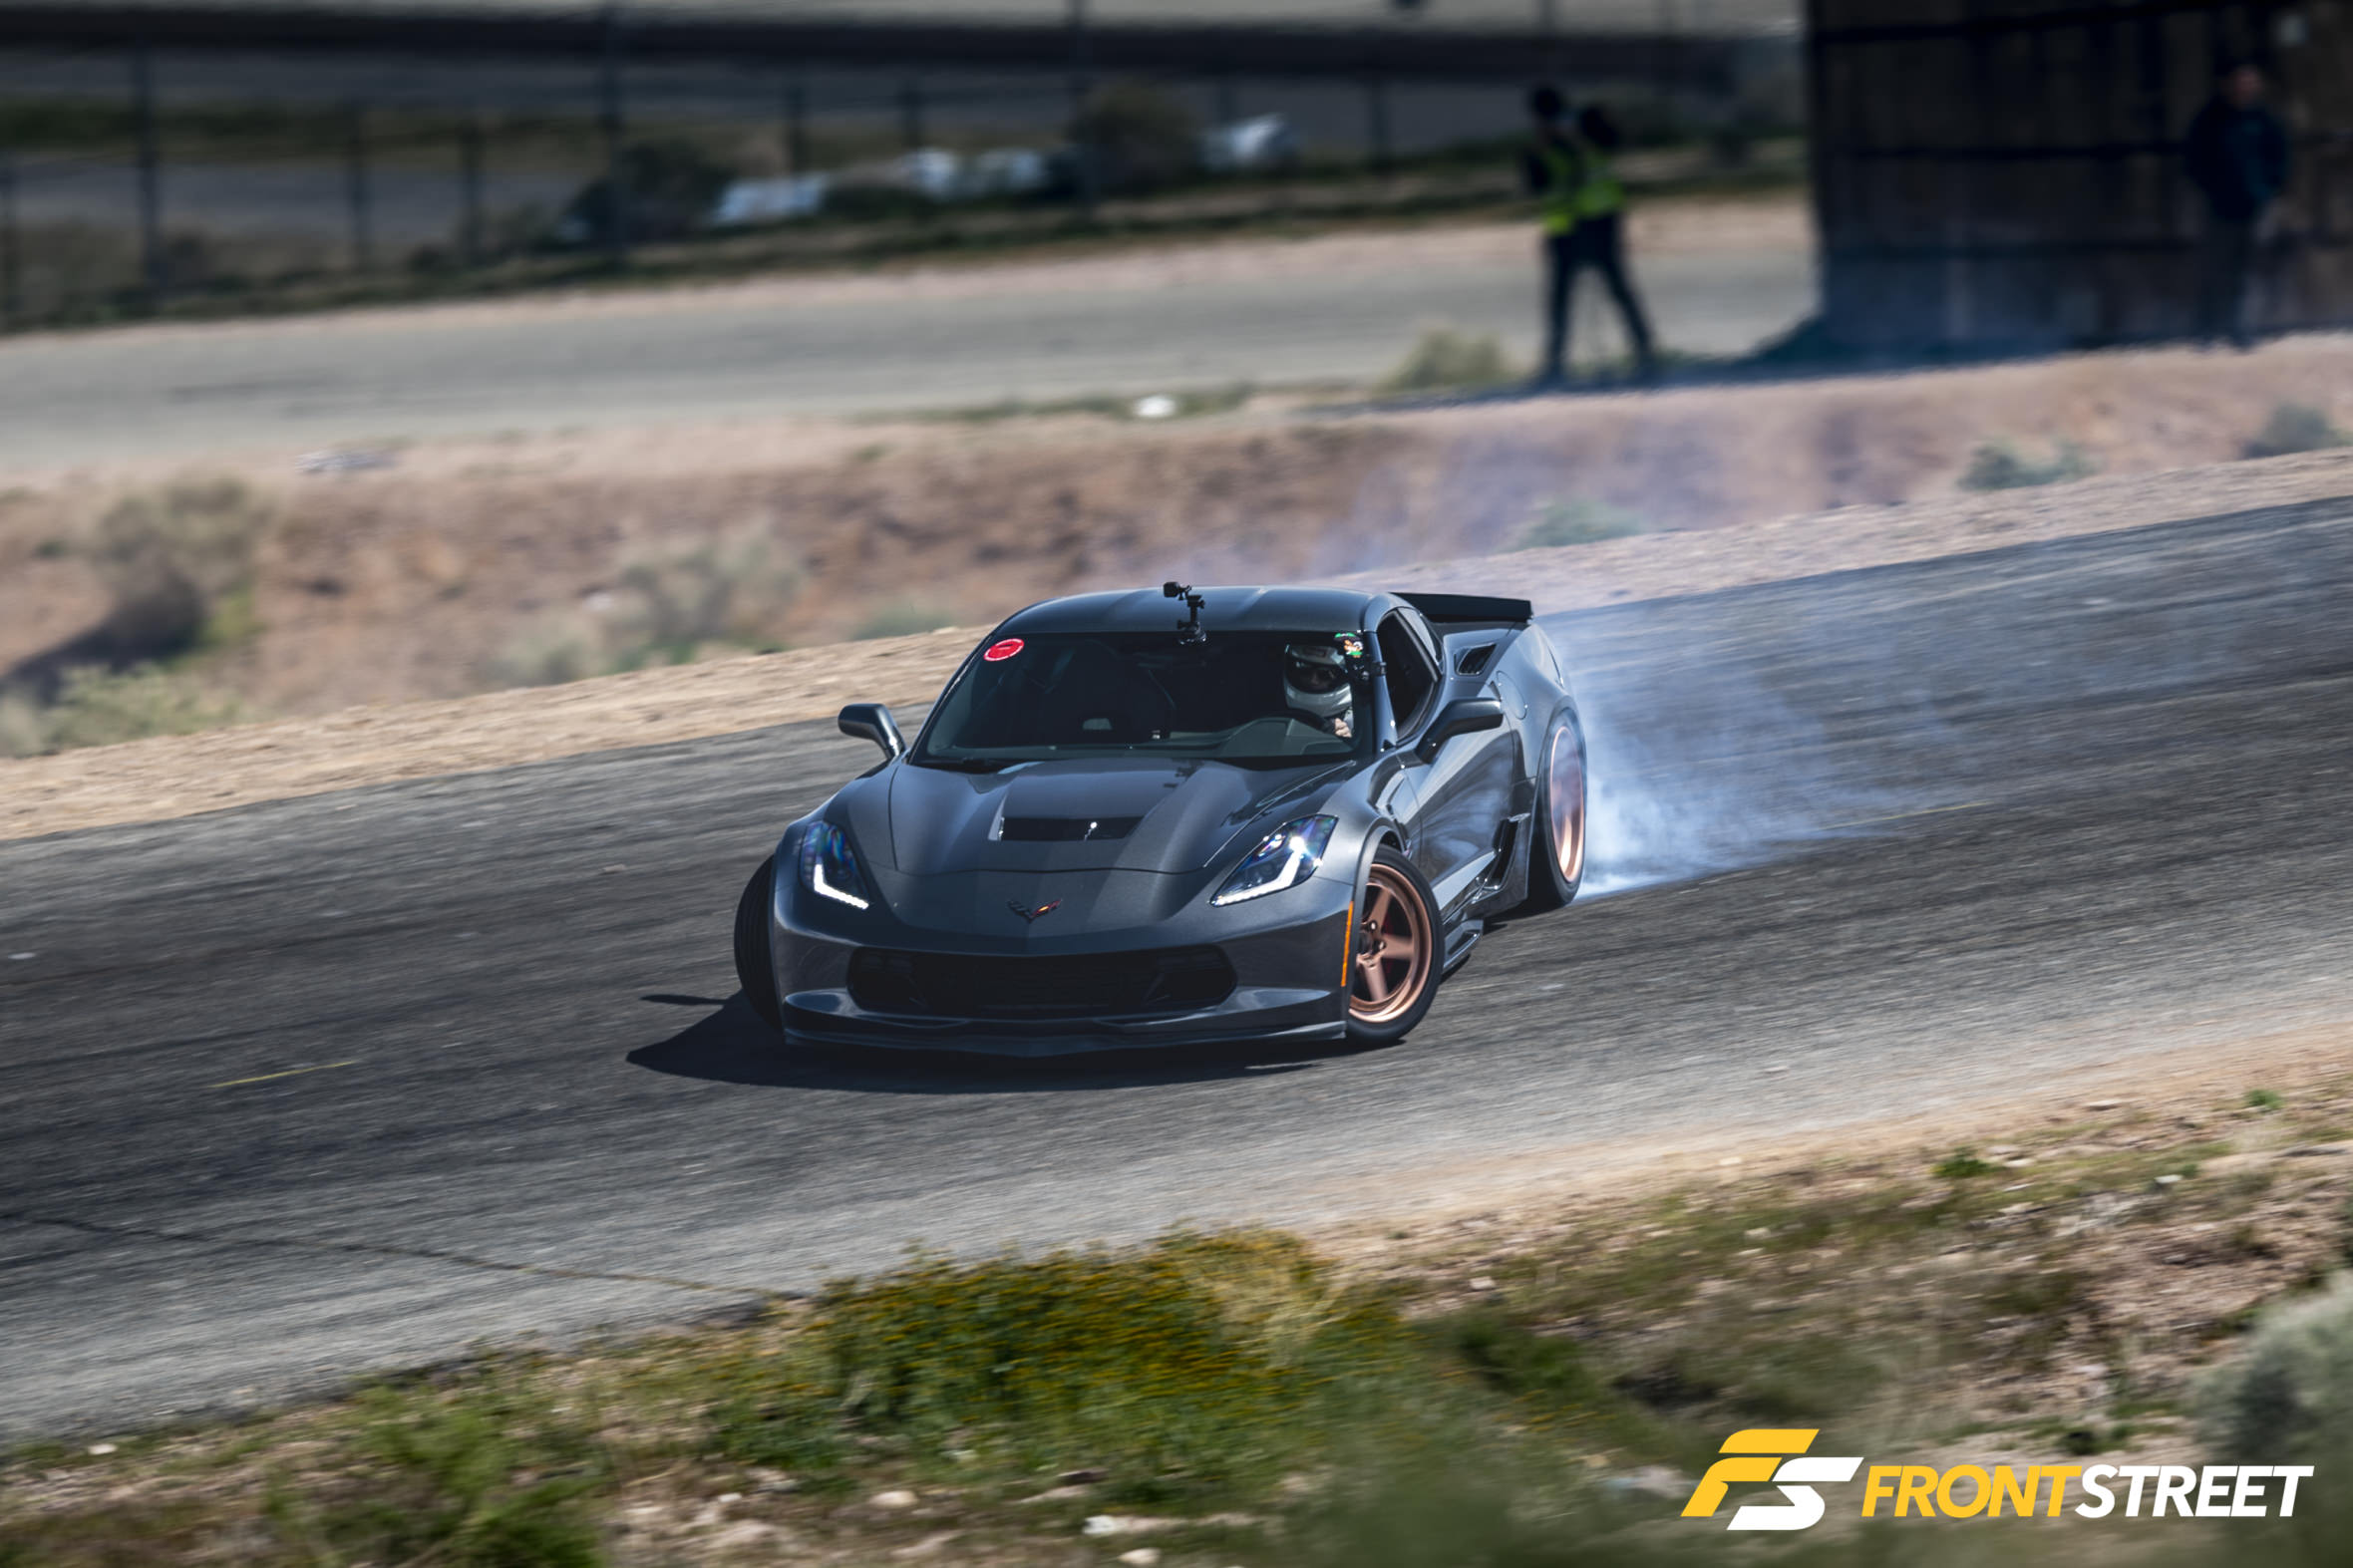 SoCal’s Jimmy Up Matsuri Welcomes Grassroots Drifting With A Twist